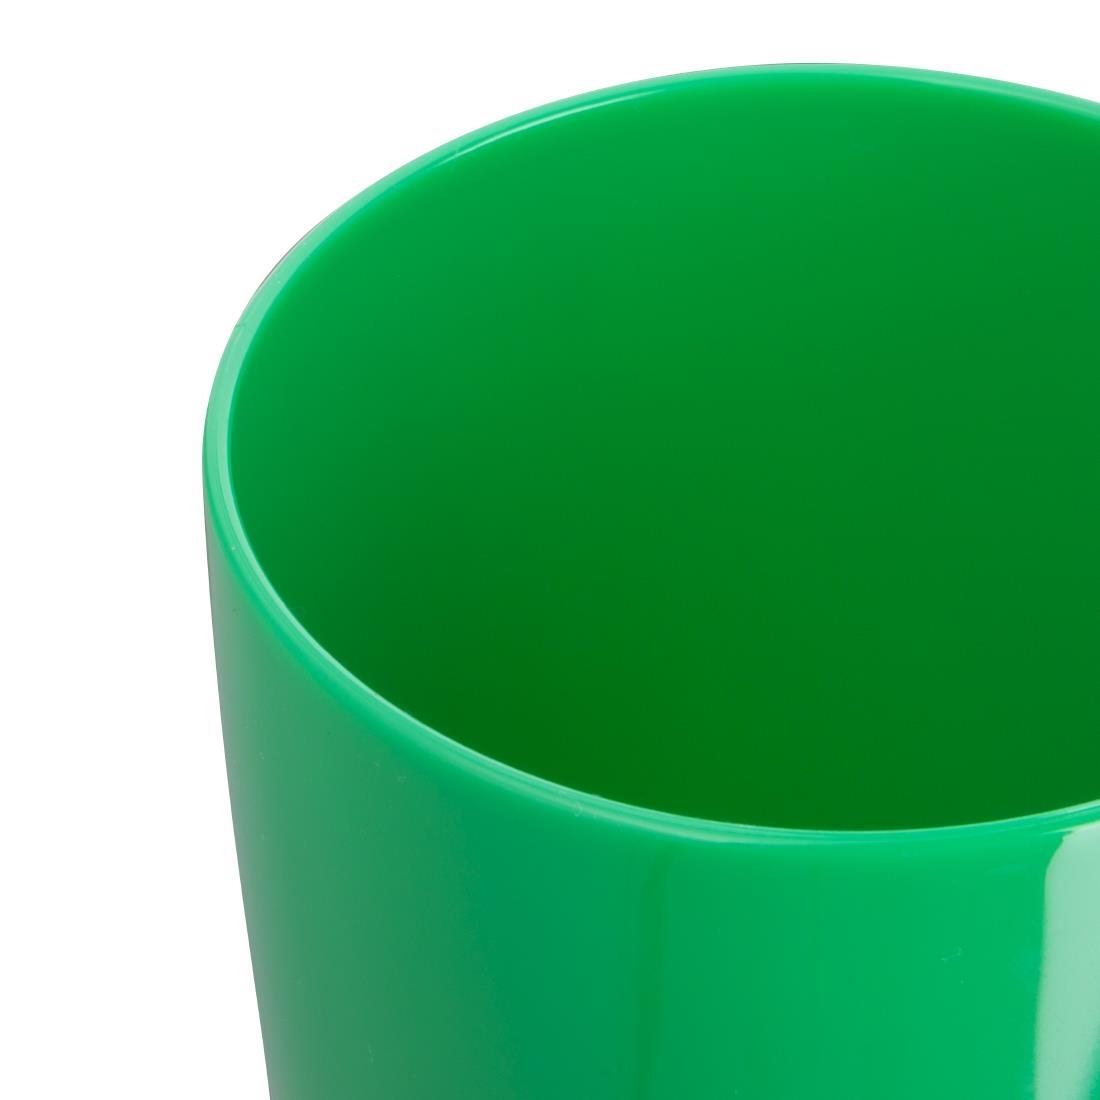 Olympia Kristallon Polycarbonate Handled Beakers Green 284ml (Pack of 12) - CE287  - 3